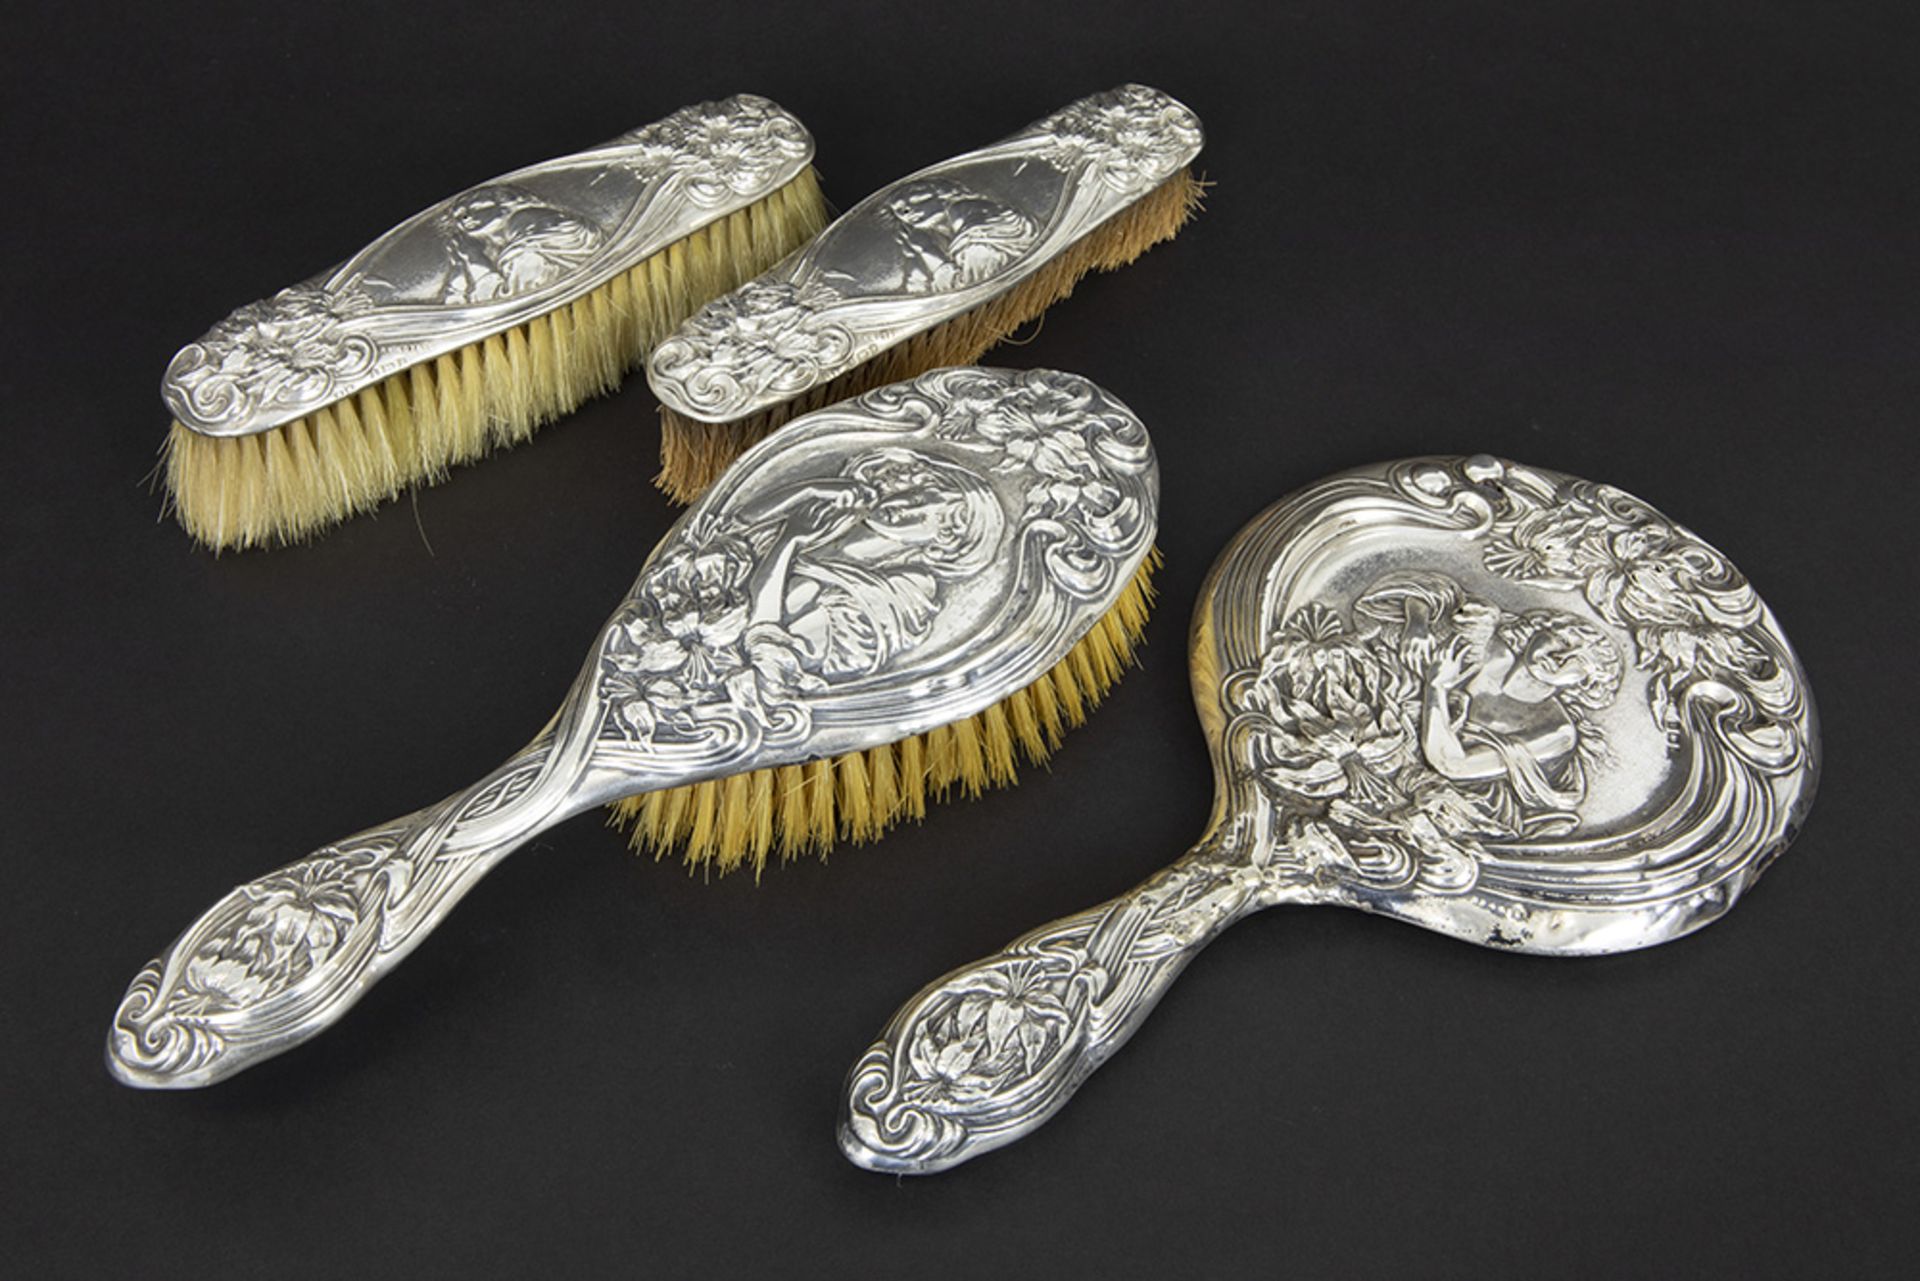 English 4pc Art Nouveau toiletset in "Henry Matthews" signed and marked silver with typical whiplash